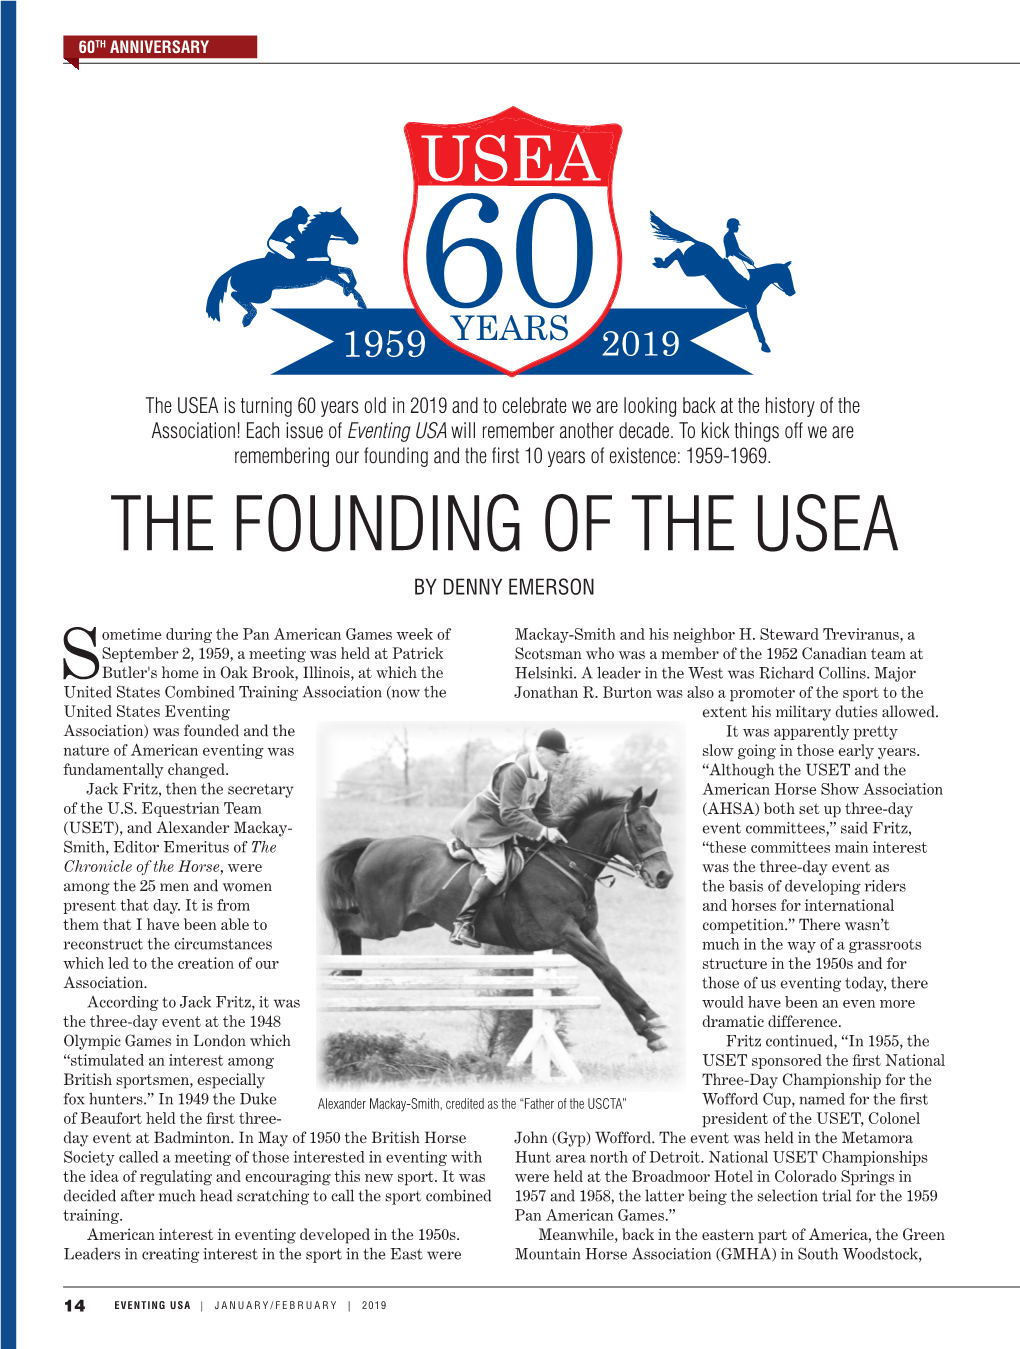 The Founding of the Usea by Denny Emerson